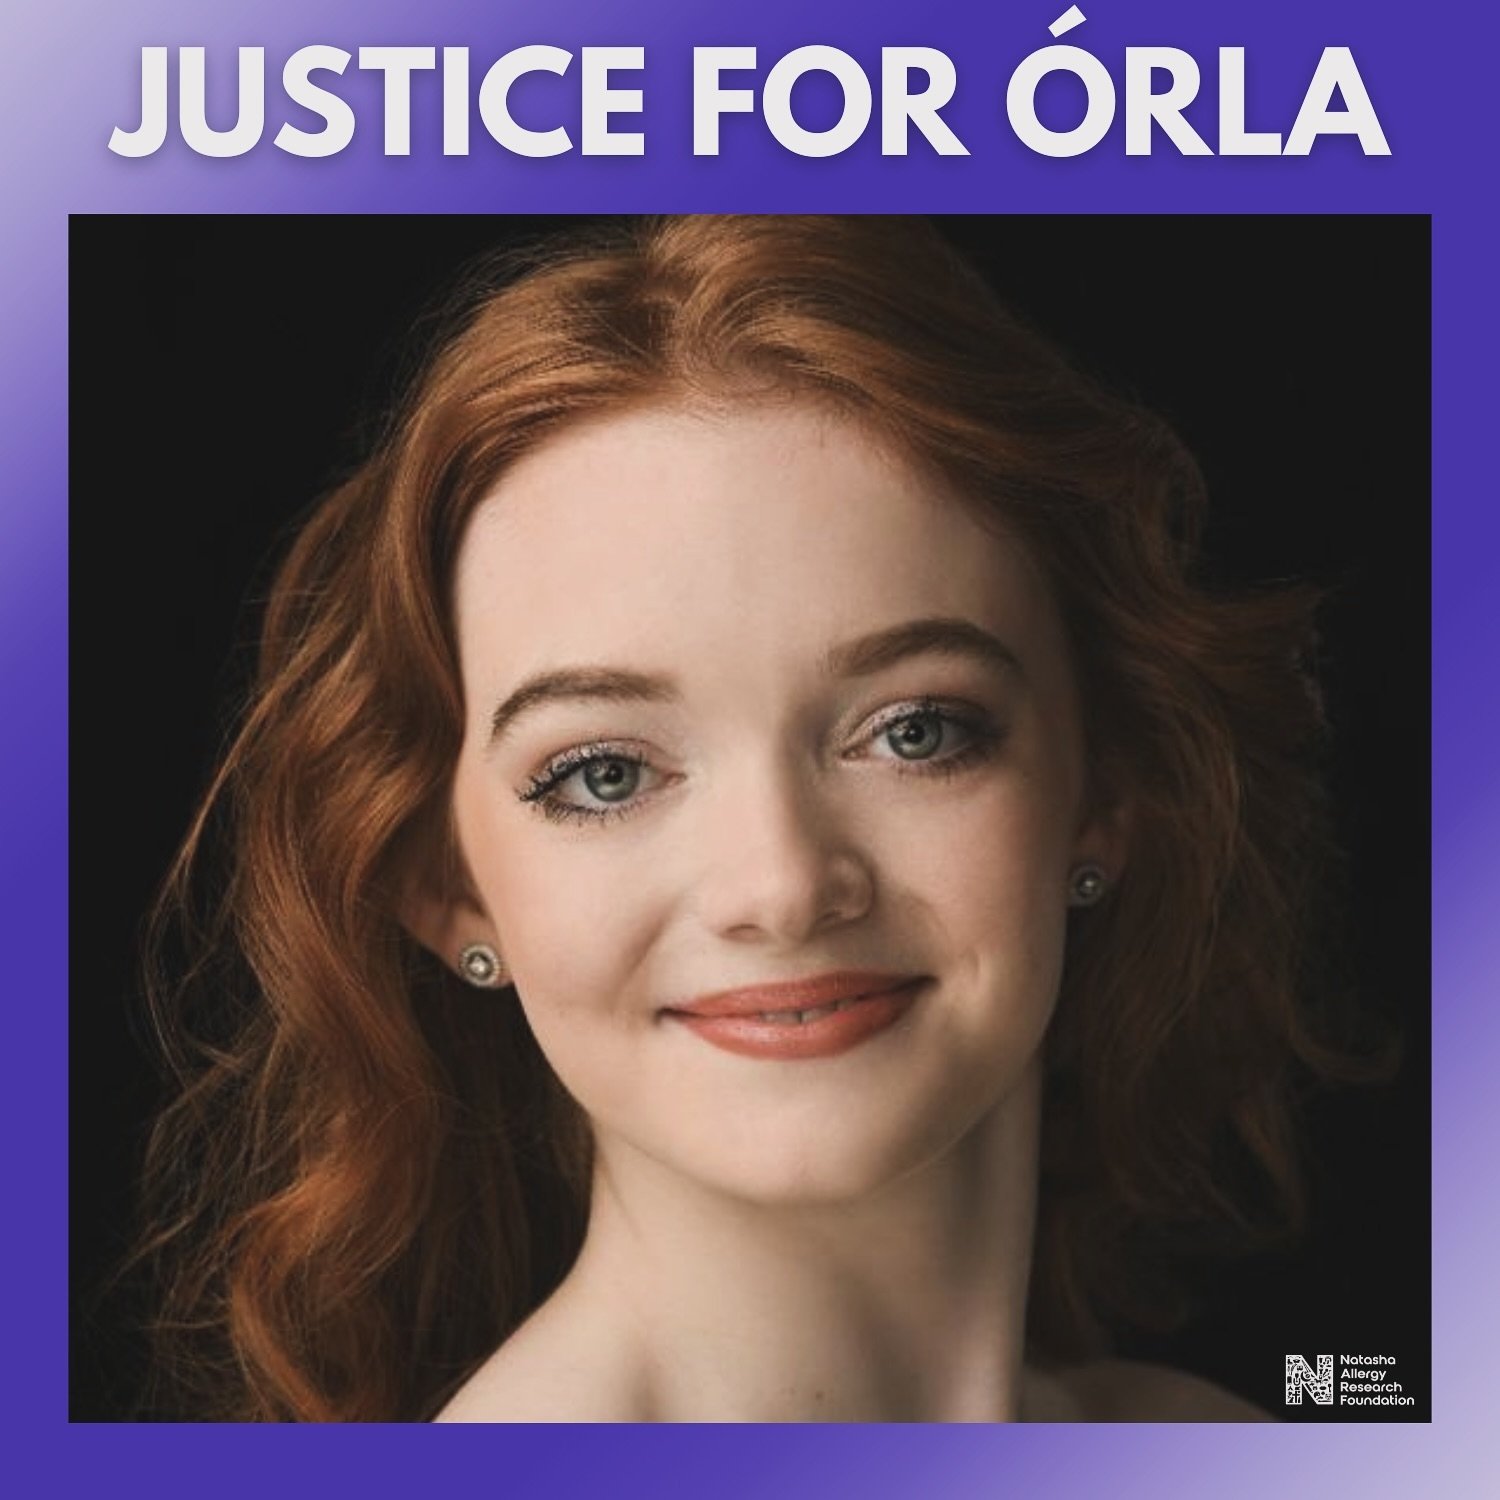 &Oacute;rla Baxendale&rsquo;s death from #anaphylaxis was devastating news to us all. She was 25 and had recently moved from the UK to New York to pursue a career as a world-class dancer. &Oacute;rla ate a cookie from a US supermarket chain but it co